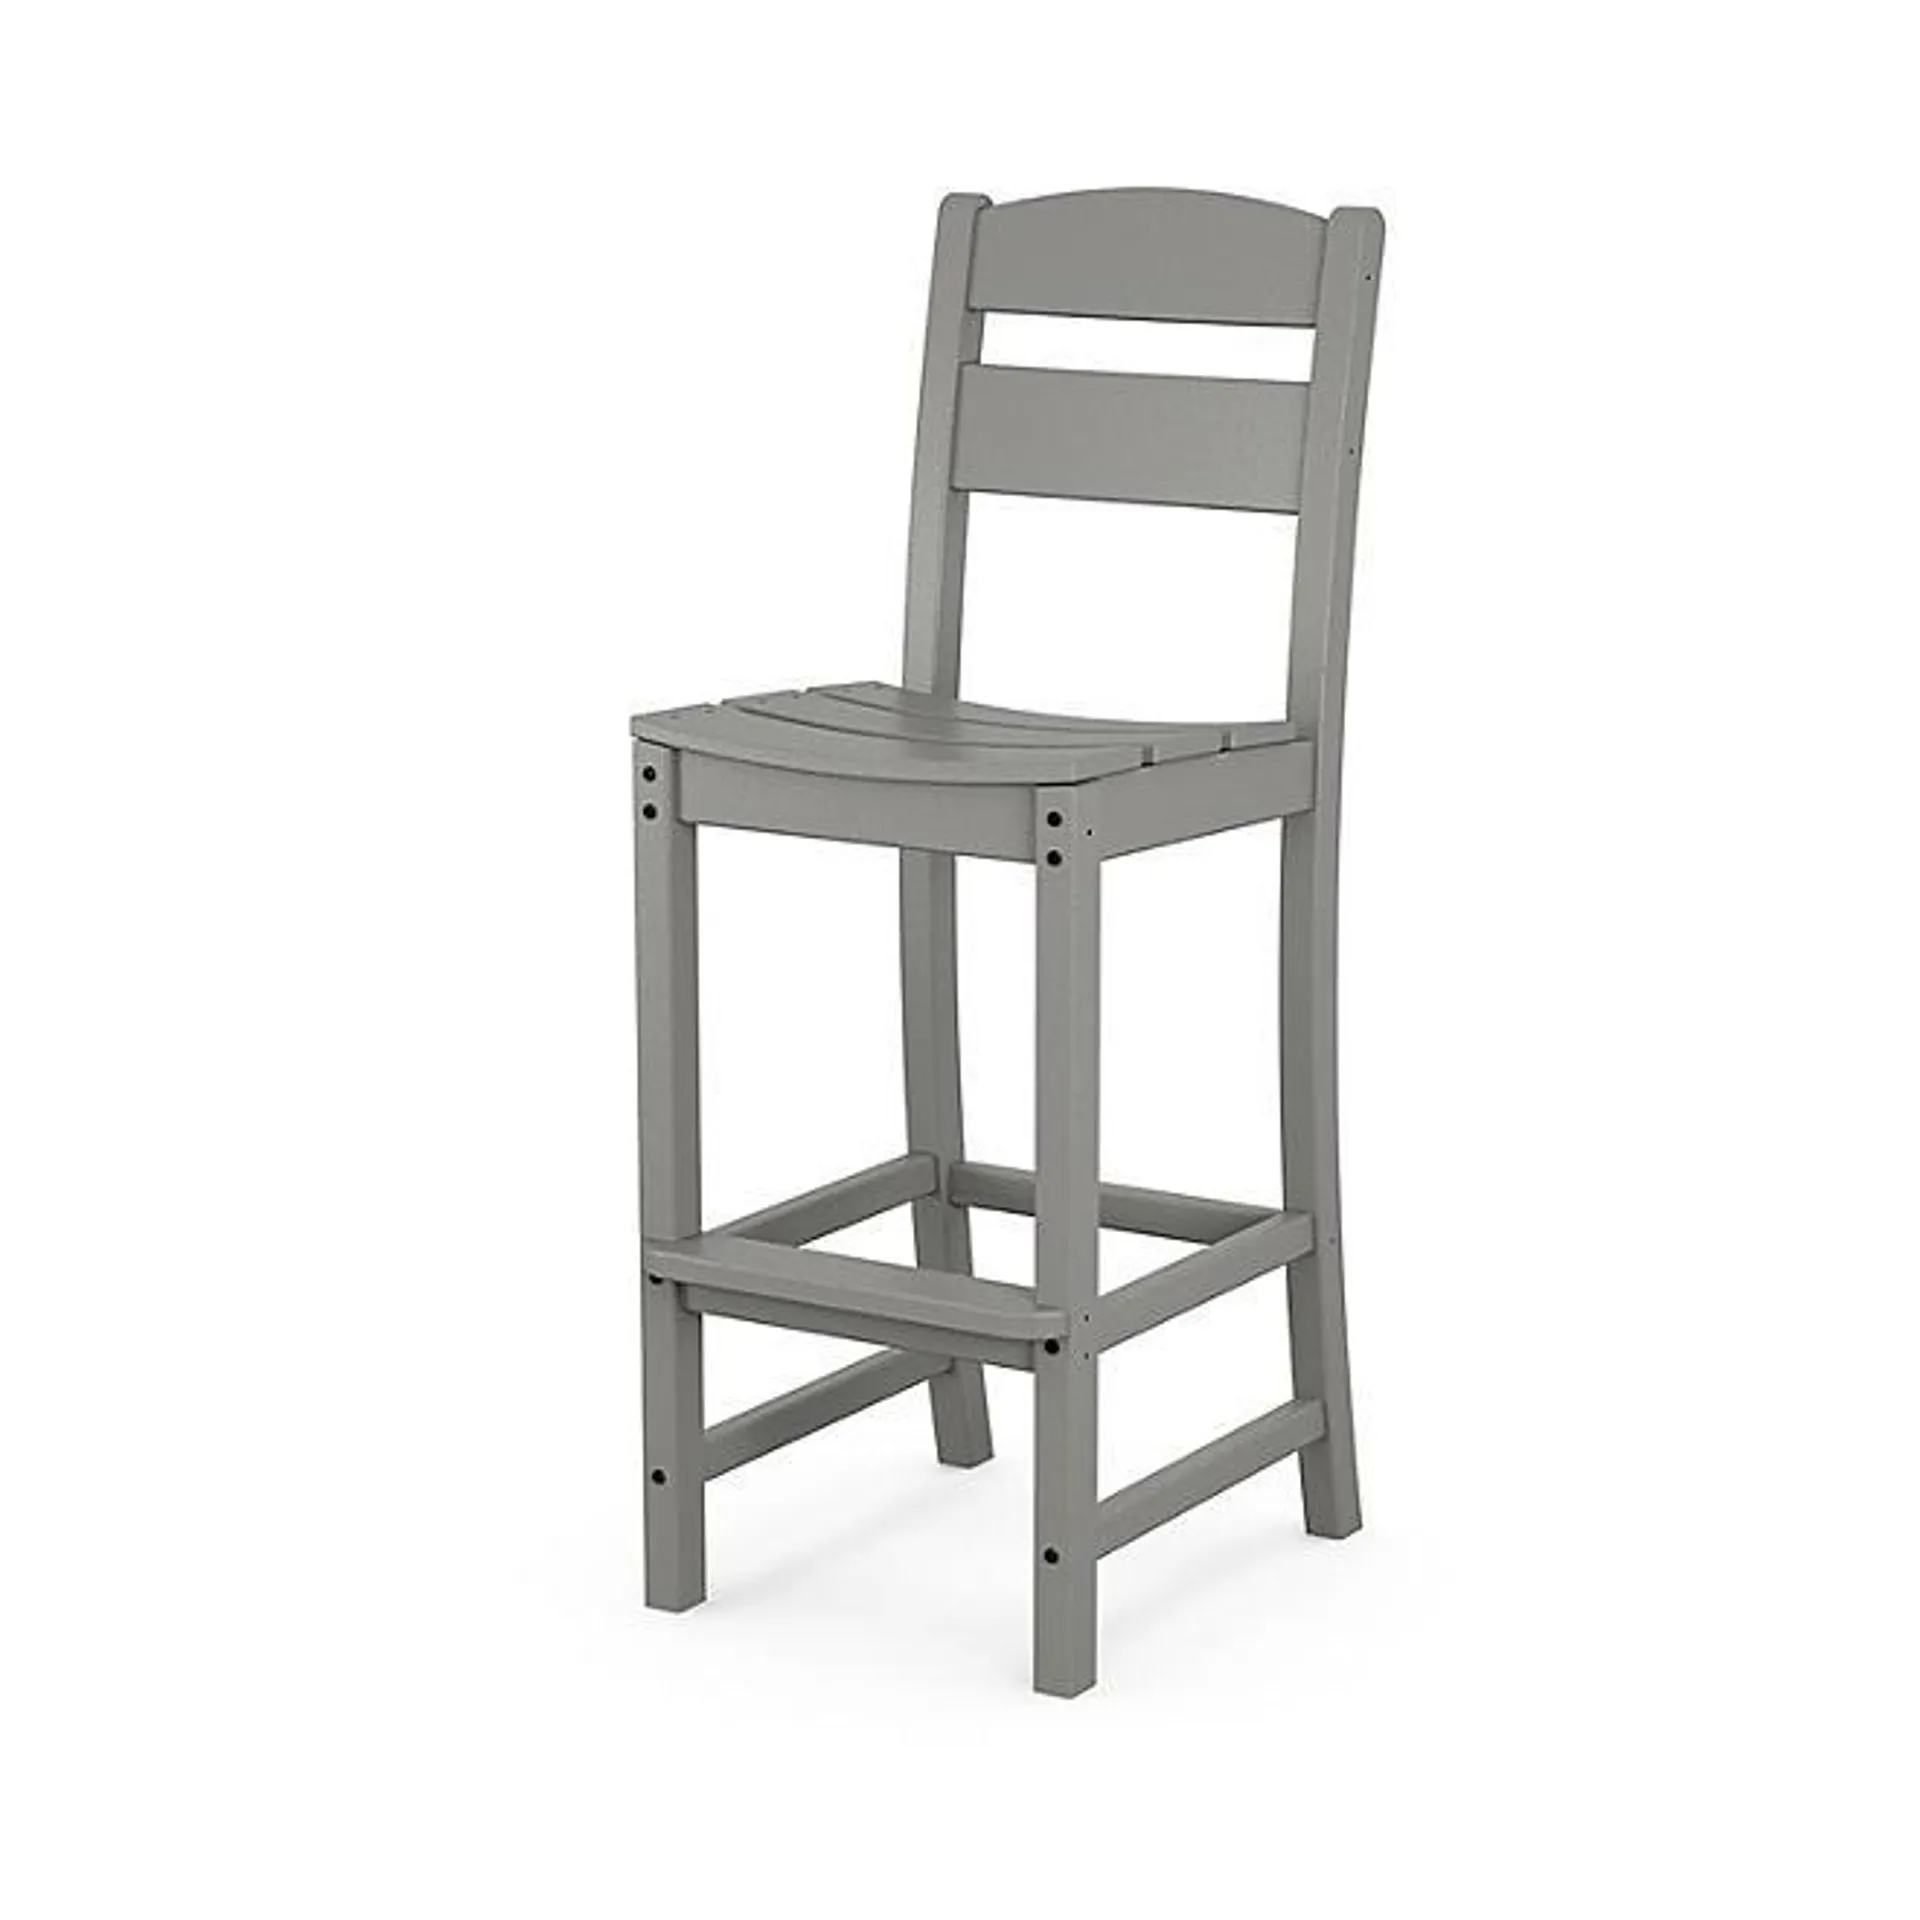 POLYWOOD Gulf Shores Bar Side Chair (Assorted Colors)